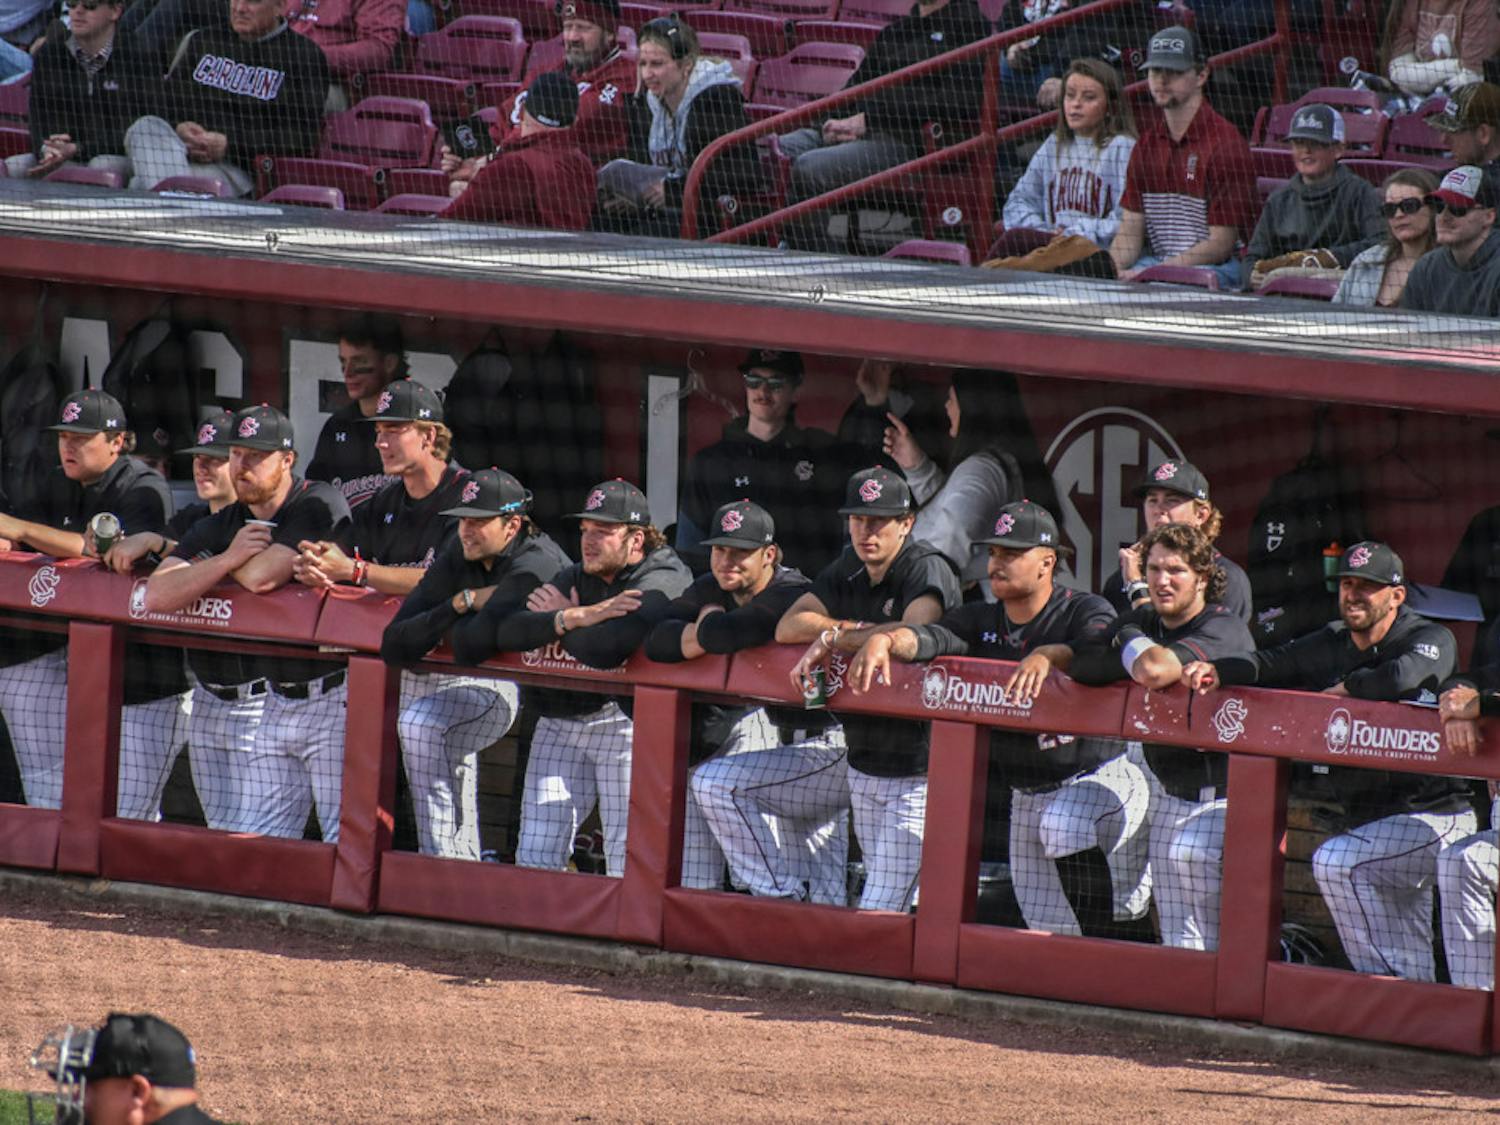 The South Carolina’s baseball team watches the field as the team plays on February 19, 2023. The Gamecocks defeated UMass Lowell 12-1 to clinch a three-game sweep.